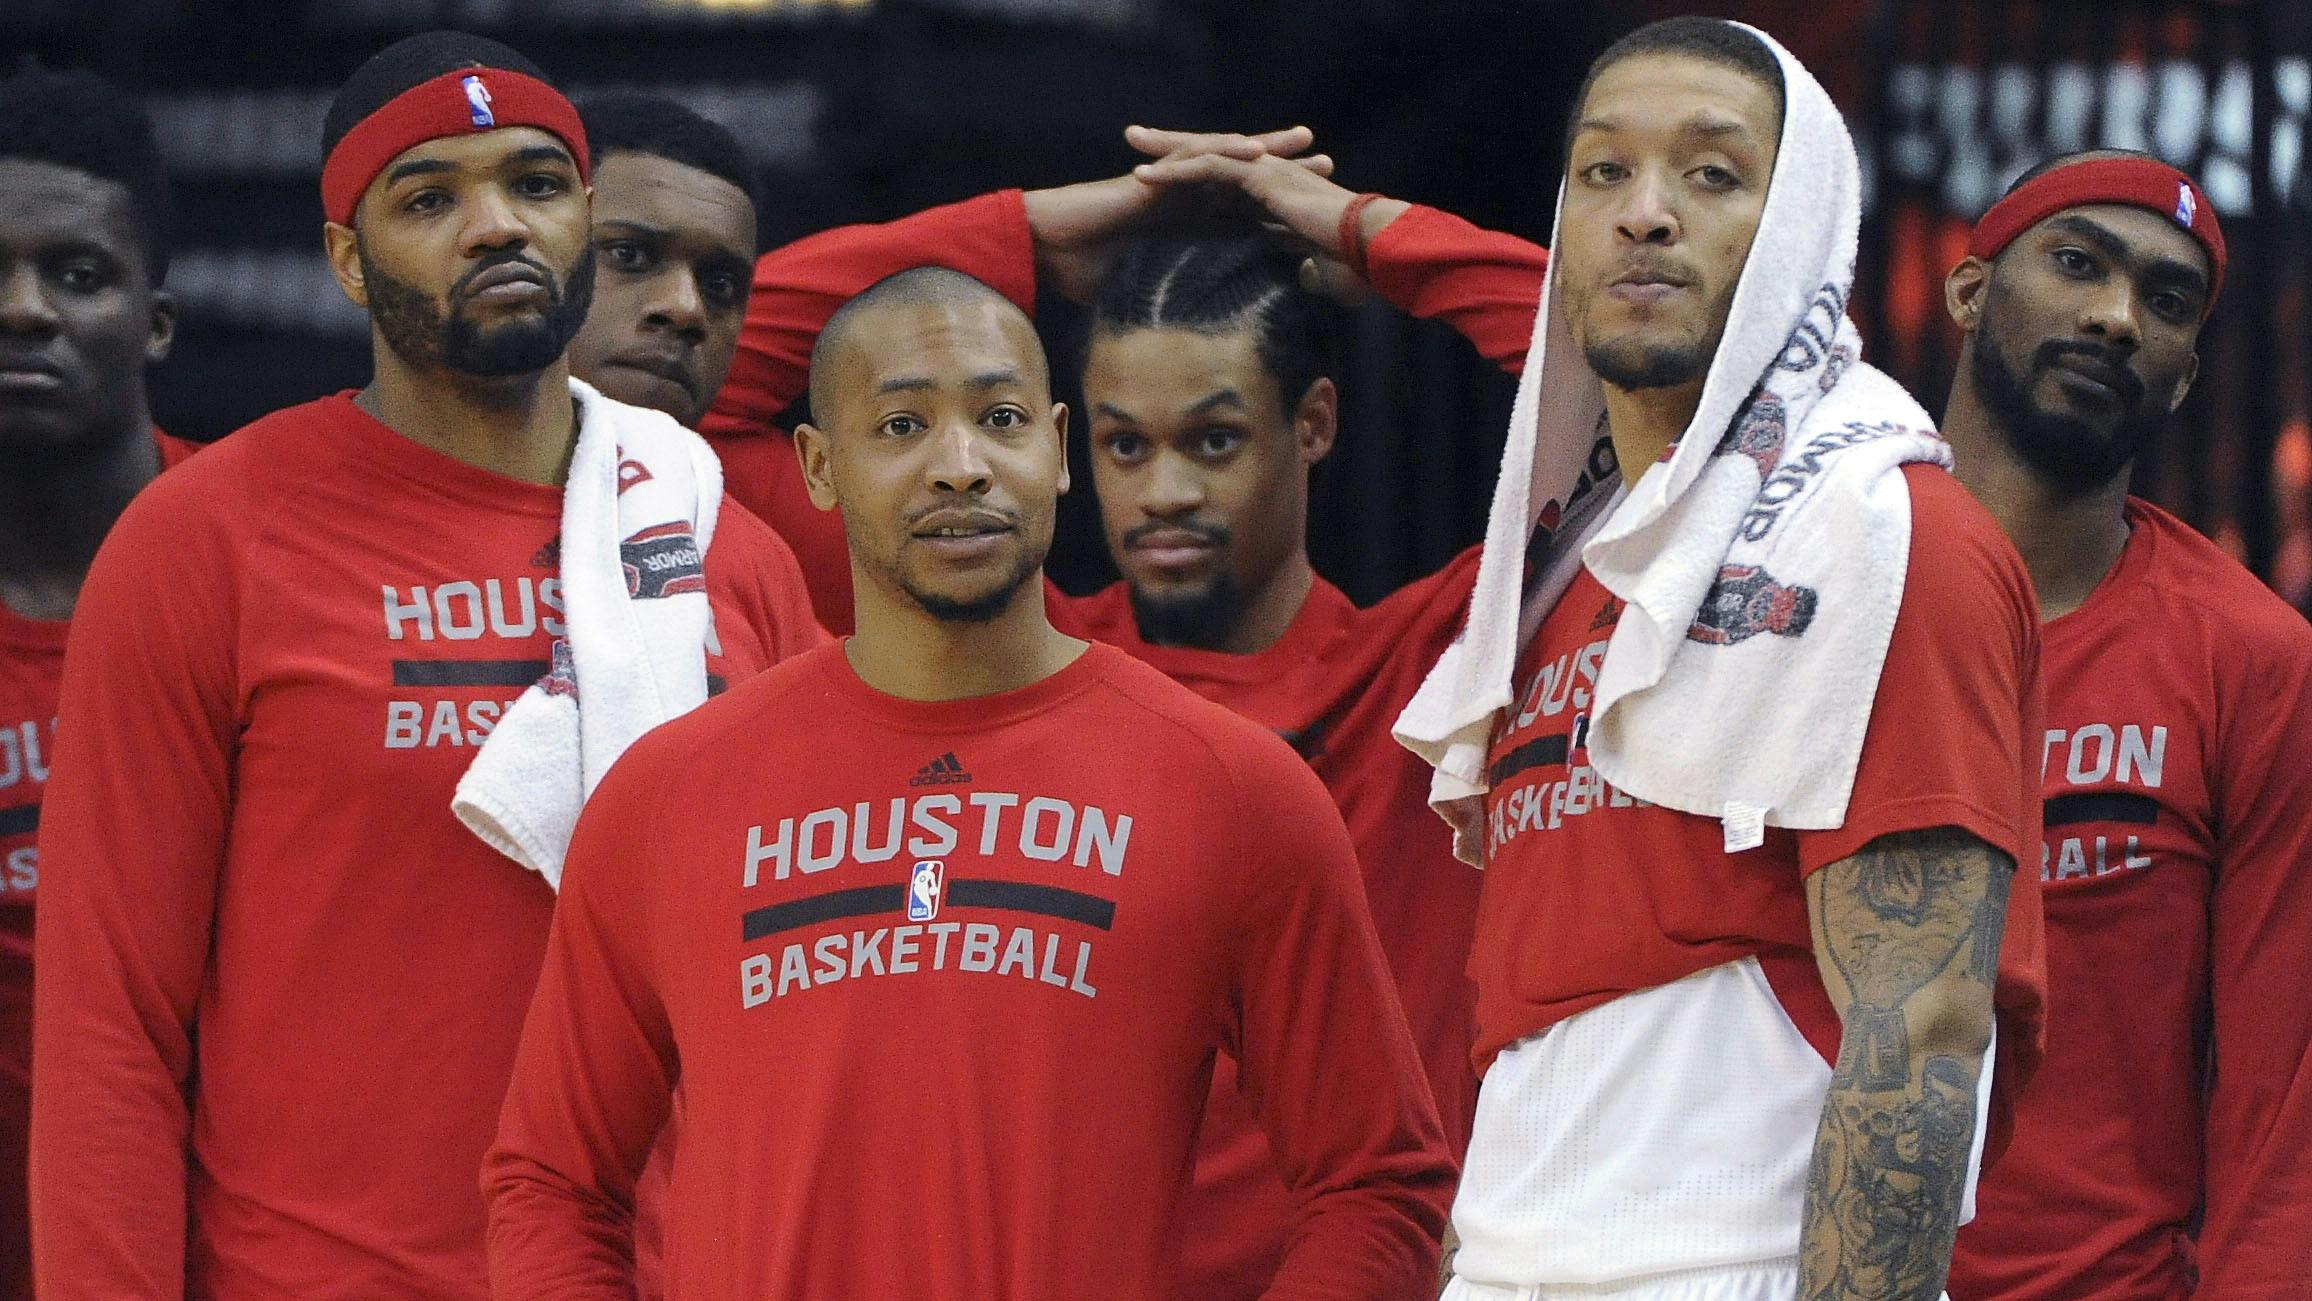 NBA Christmas 2015, Spurs vs. Rockets results: 3 things we learned